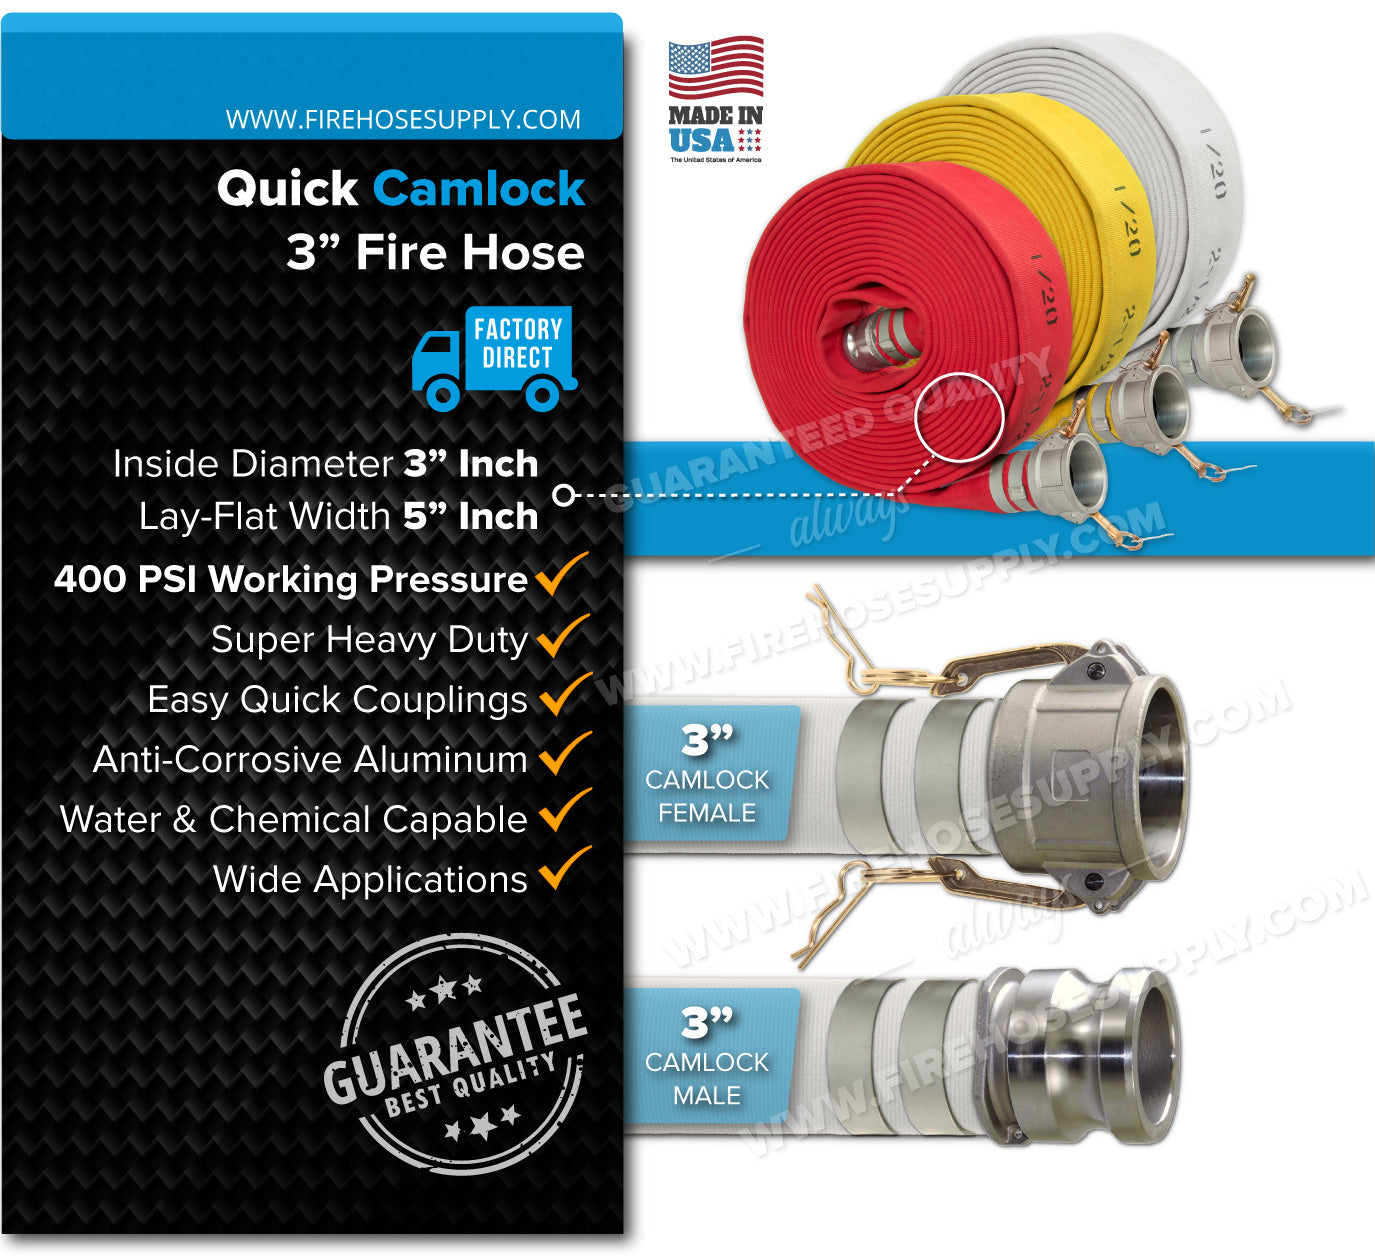 3 Inch Double Jacket Camlock Fire Hose Overview